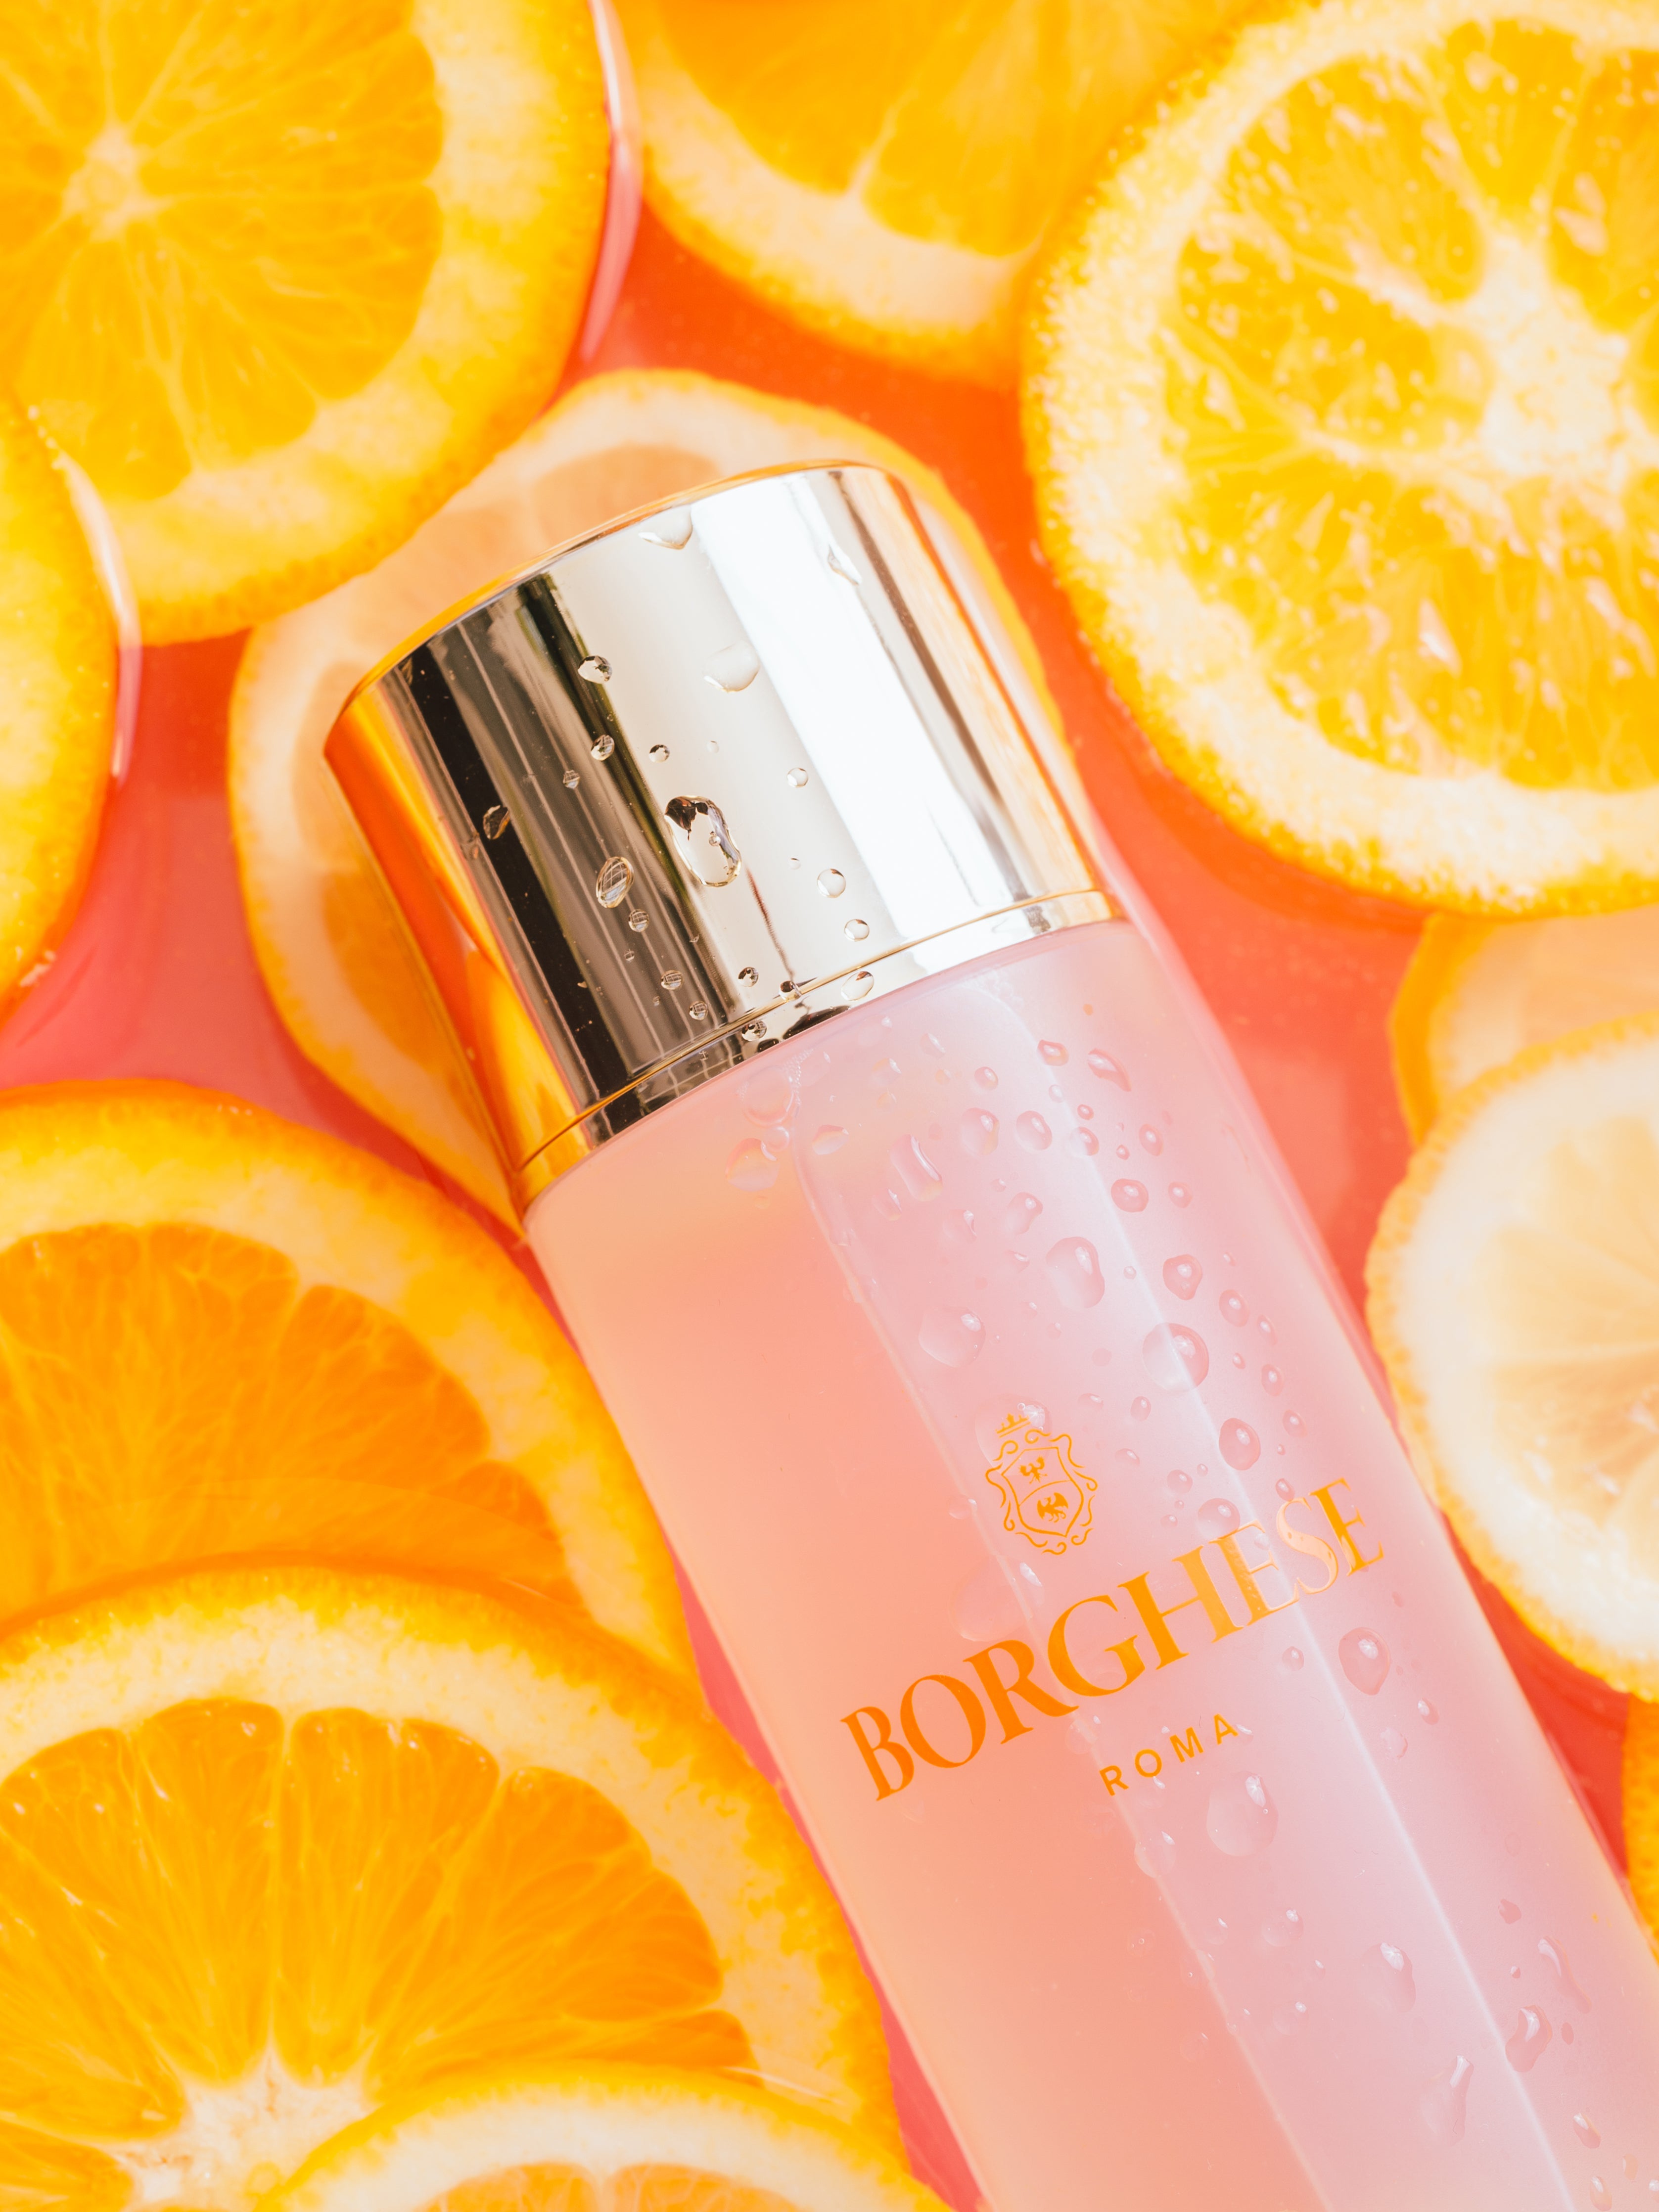 This is a picture of Borghese ENERGIA Daily Vitamin Toner bottle with orange slices